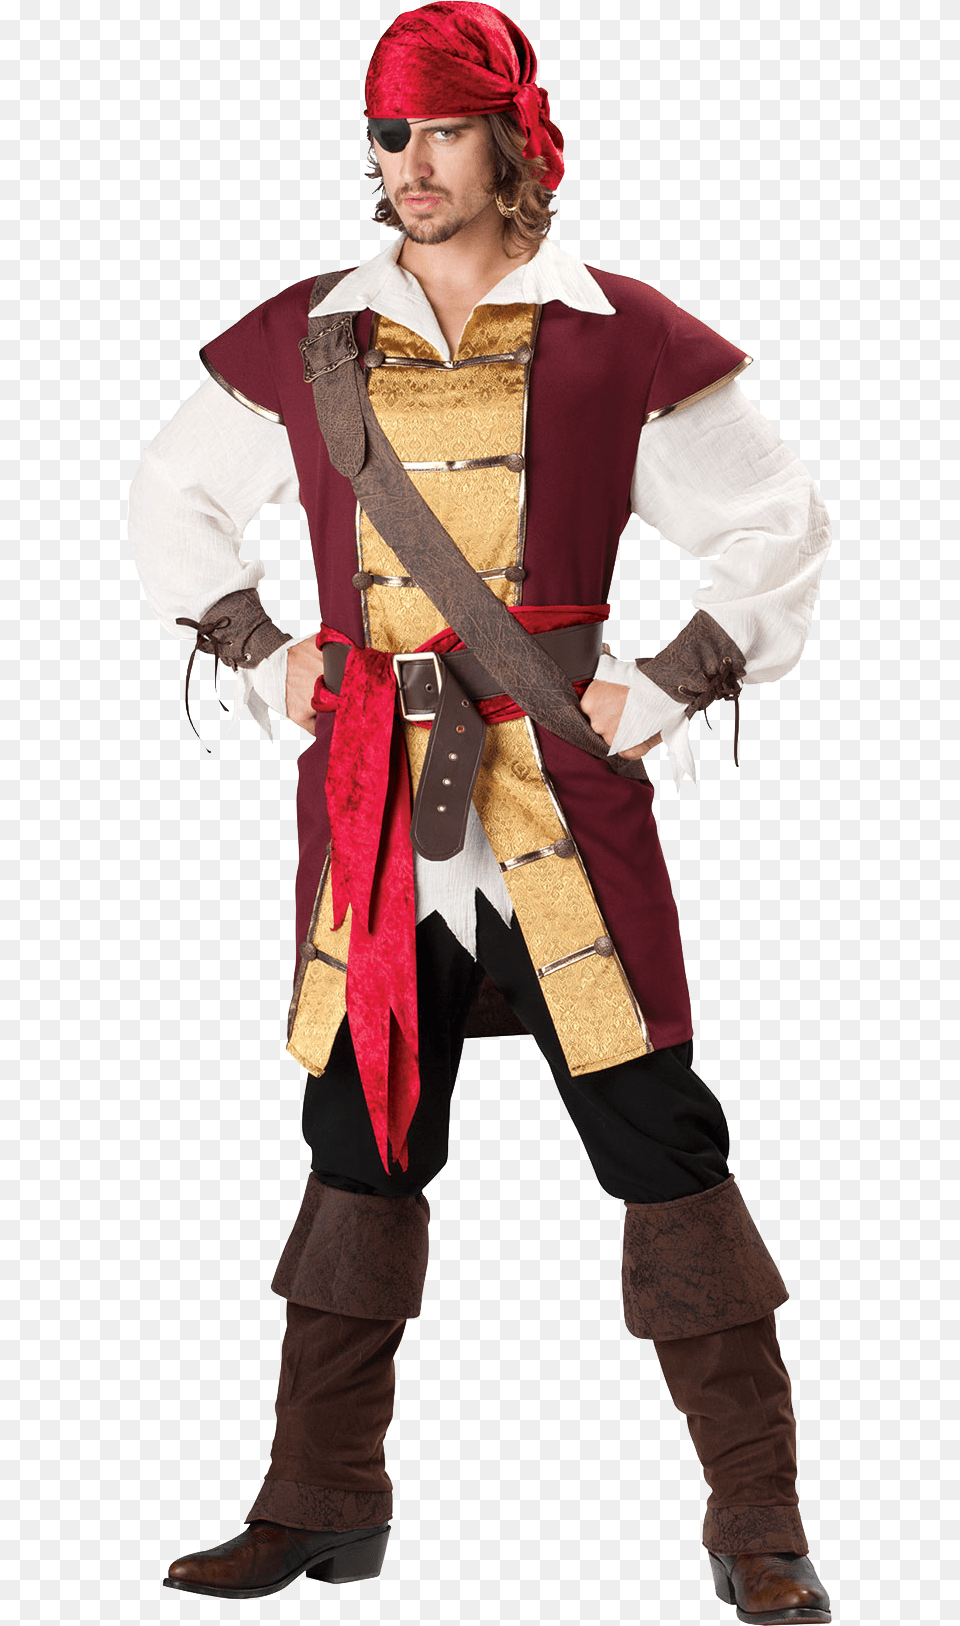 Pirate, Clothing, Coat, Costume, Person Png Image